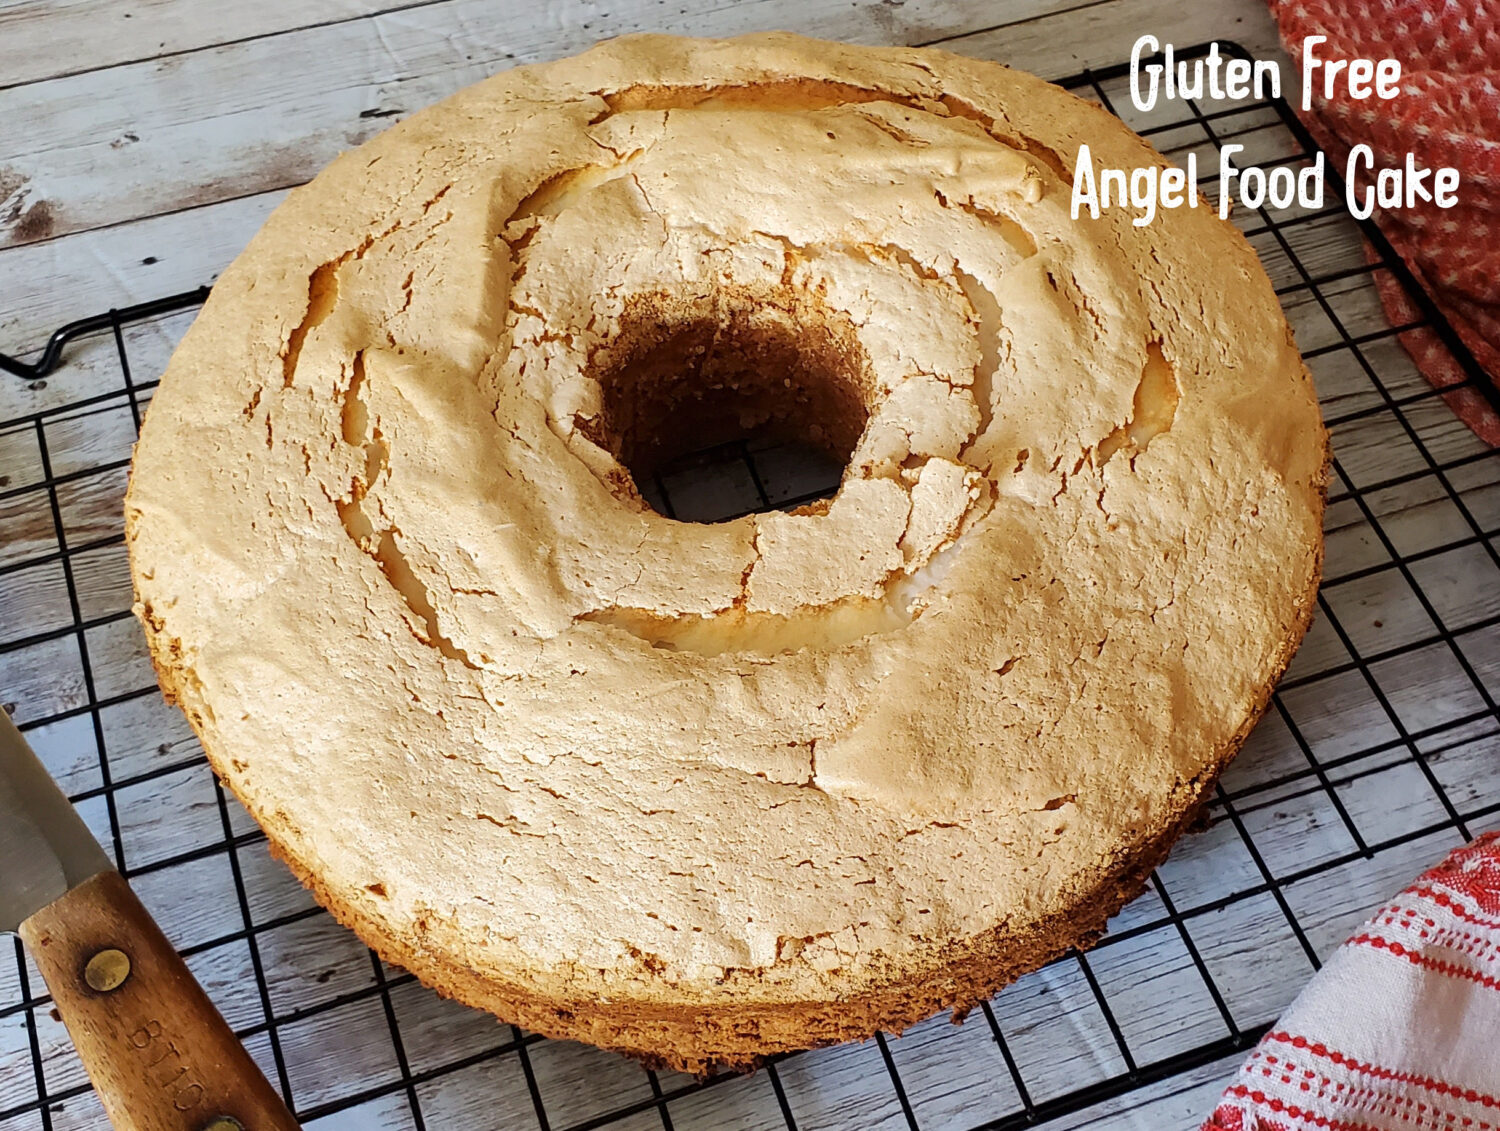 Angel Food Cake: Light and airy tasty sponge cake which can be made gluten free or with all purpose flour.